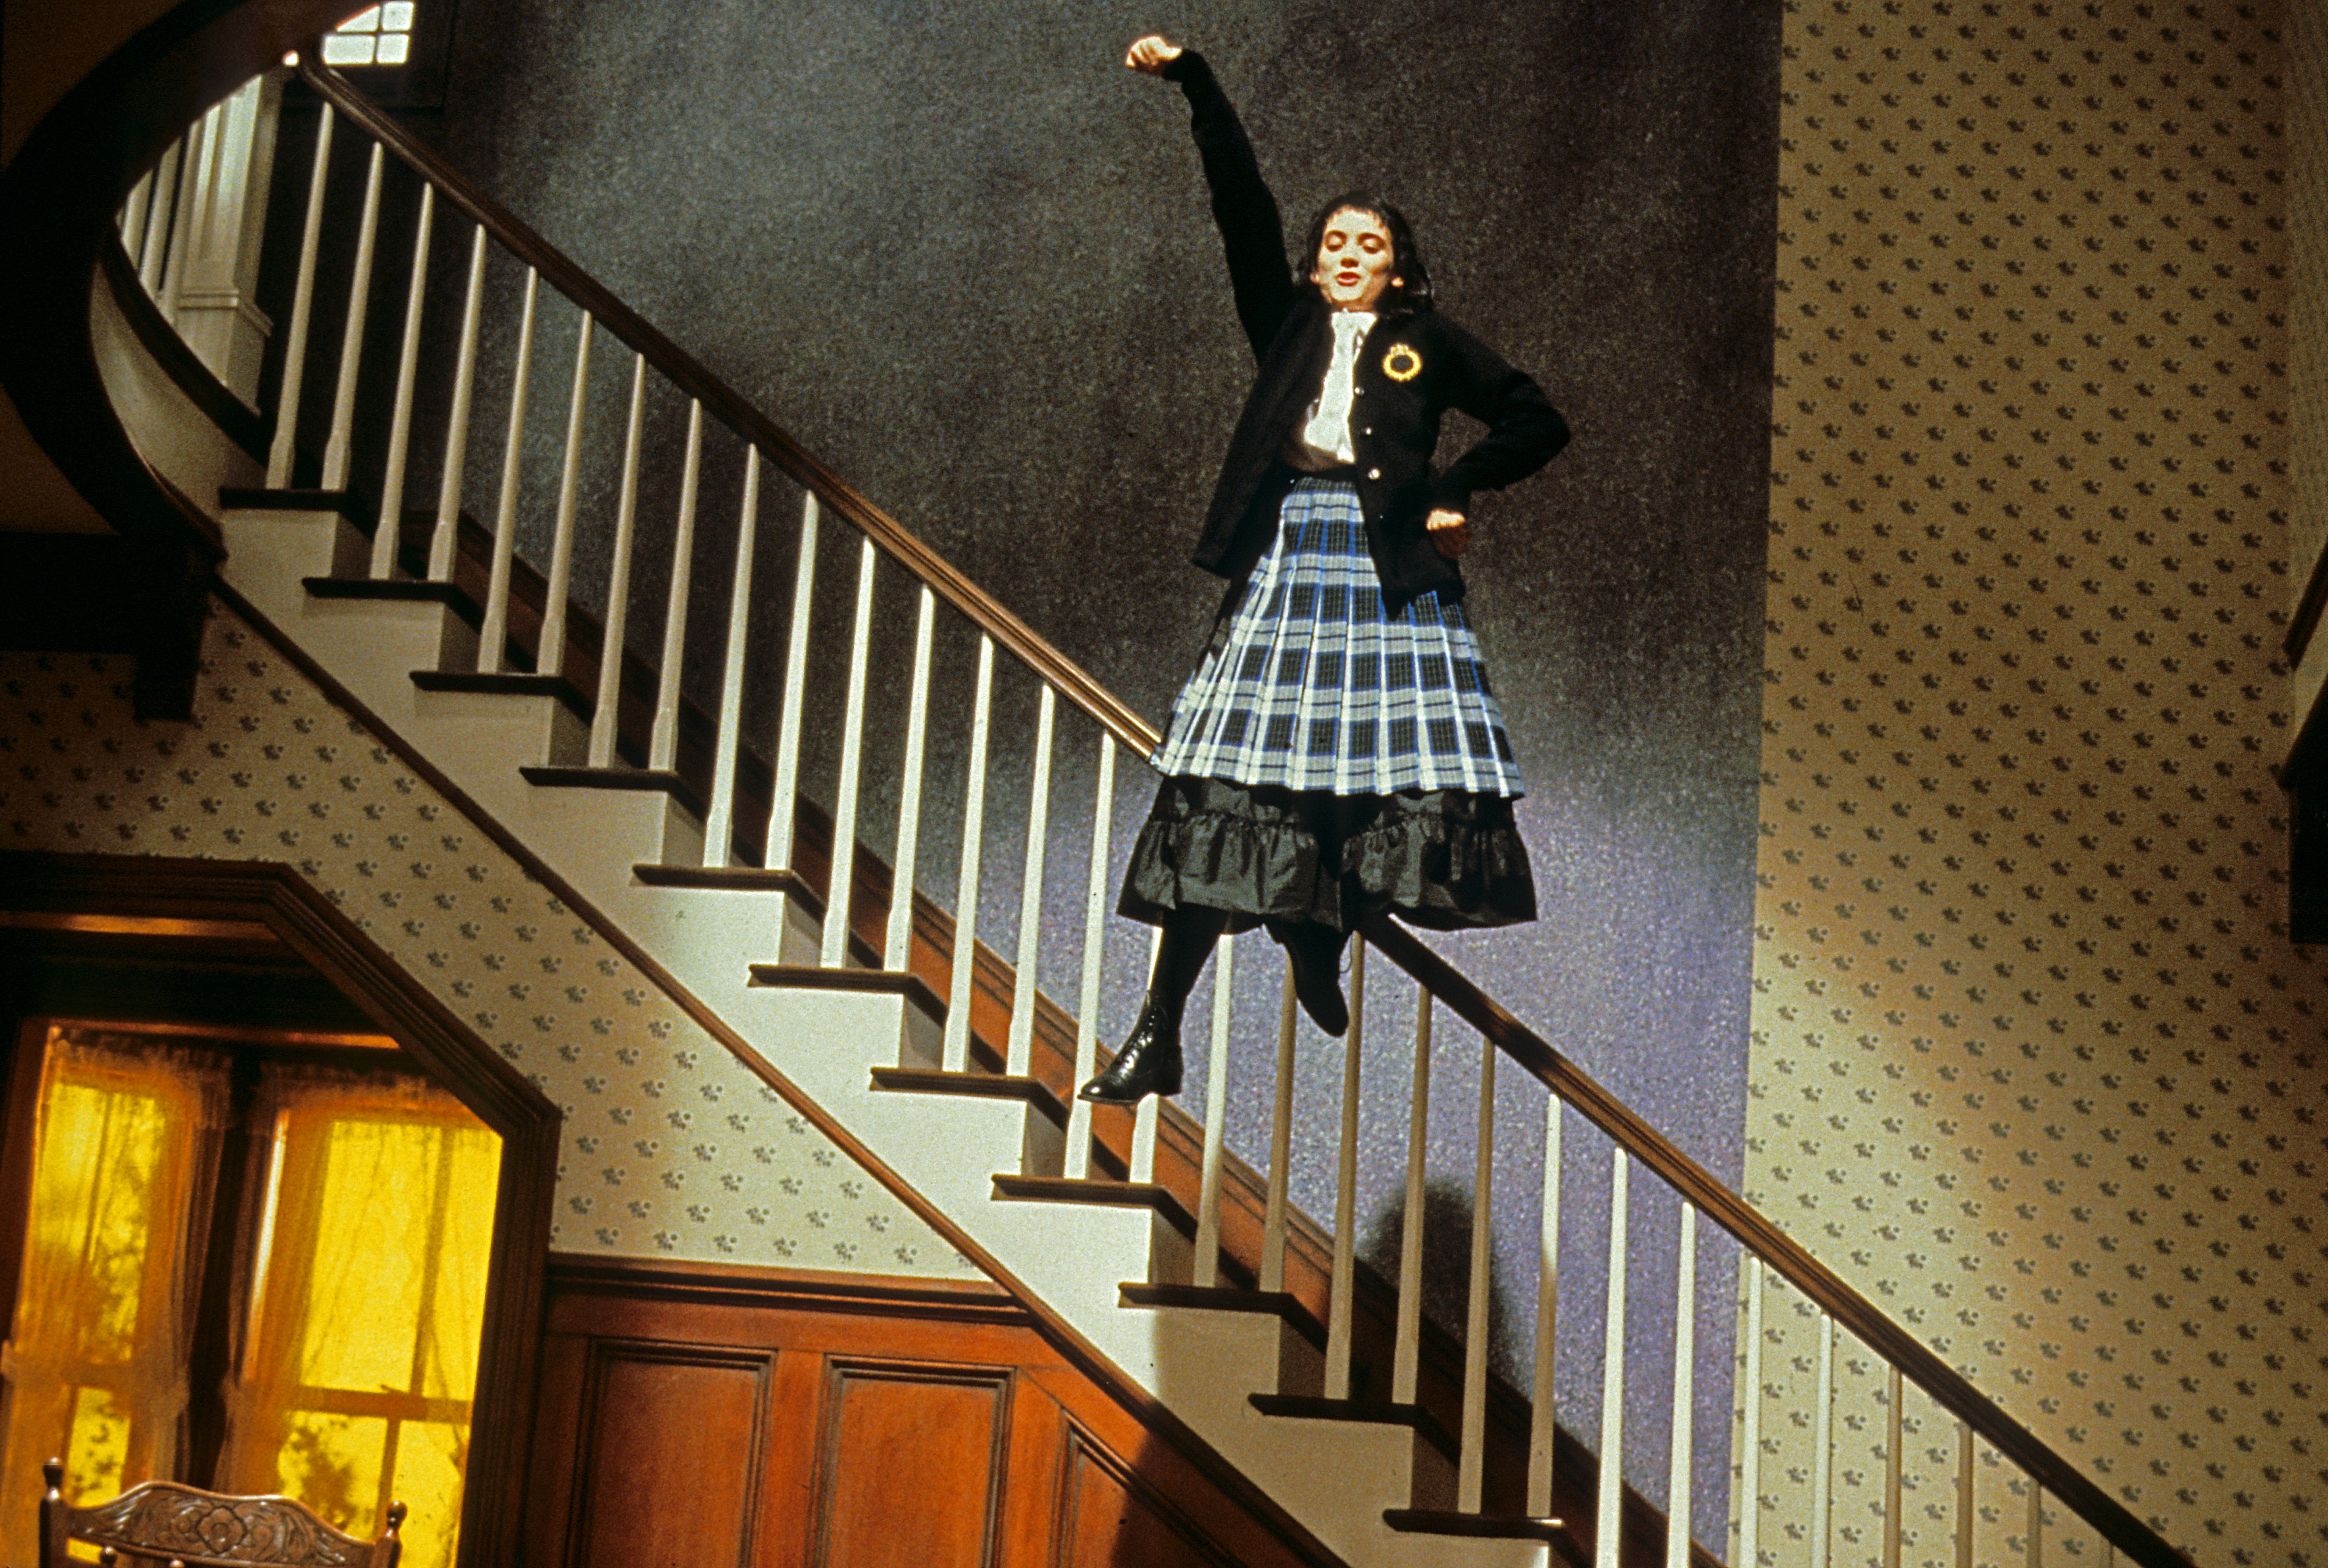 Lydia Deetz from Beetlejuice stands on stairs in a gothic-style black and white dress with arms raised